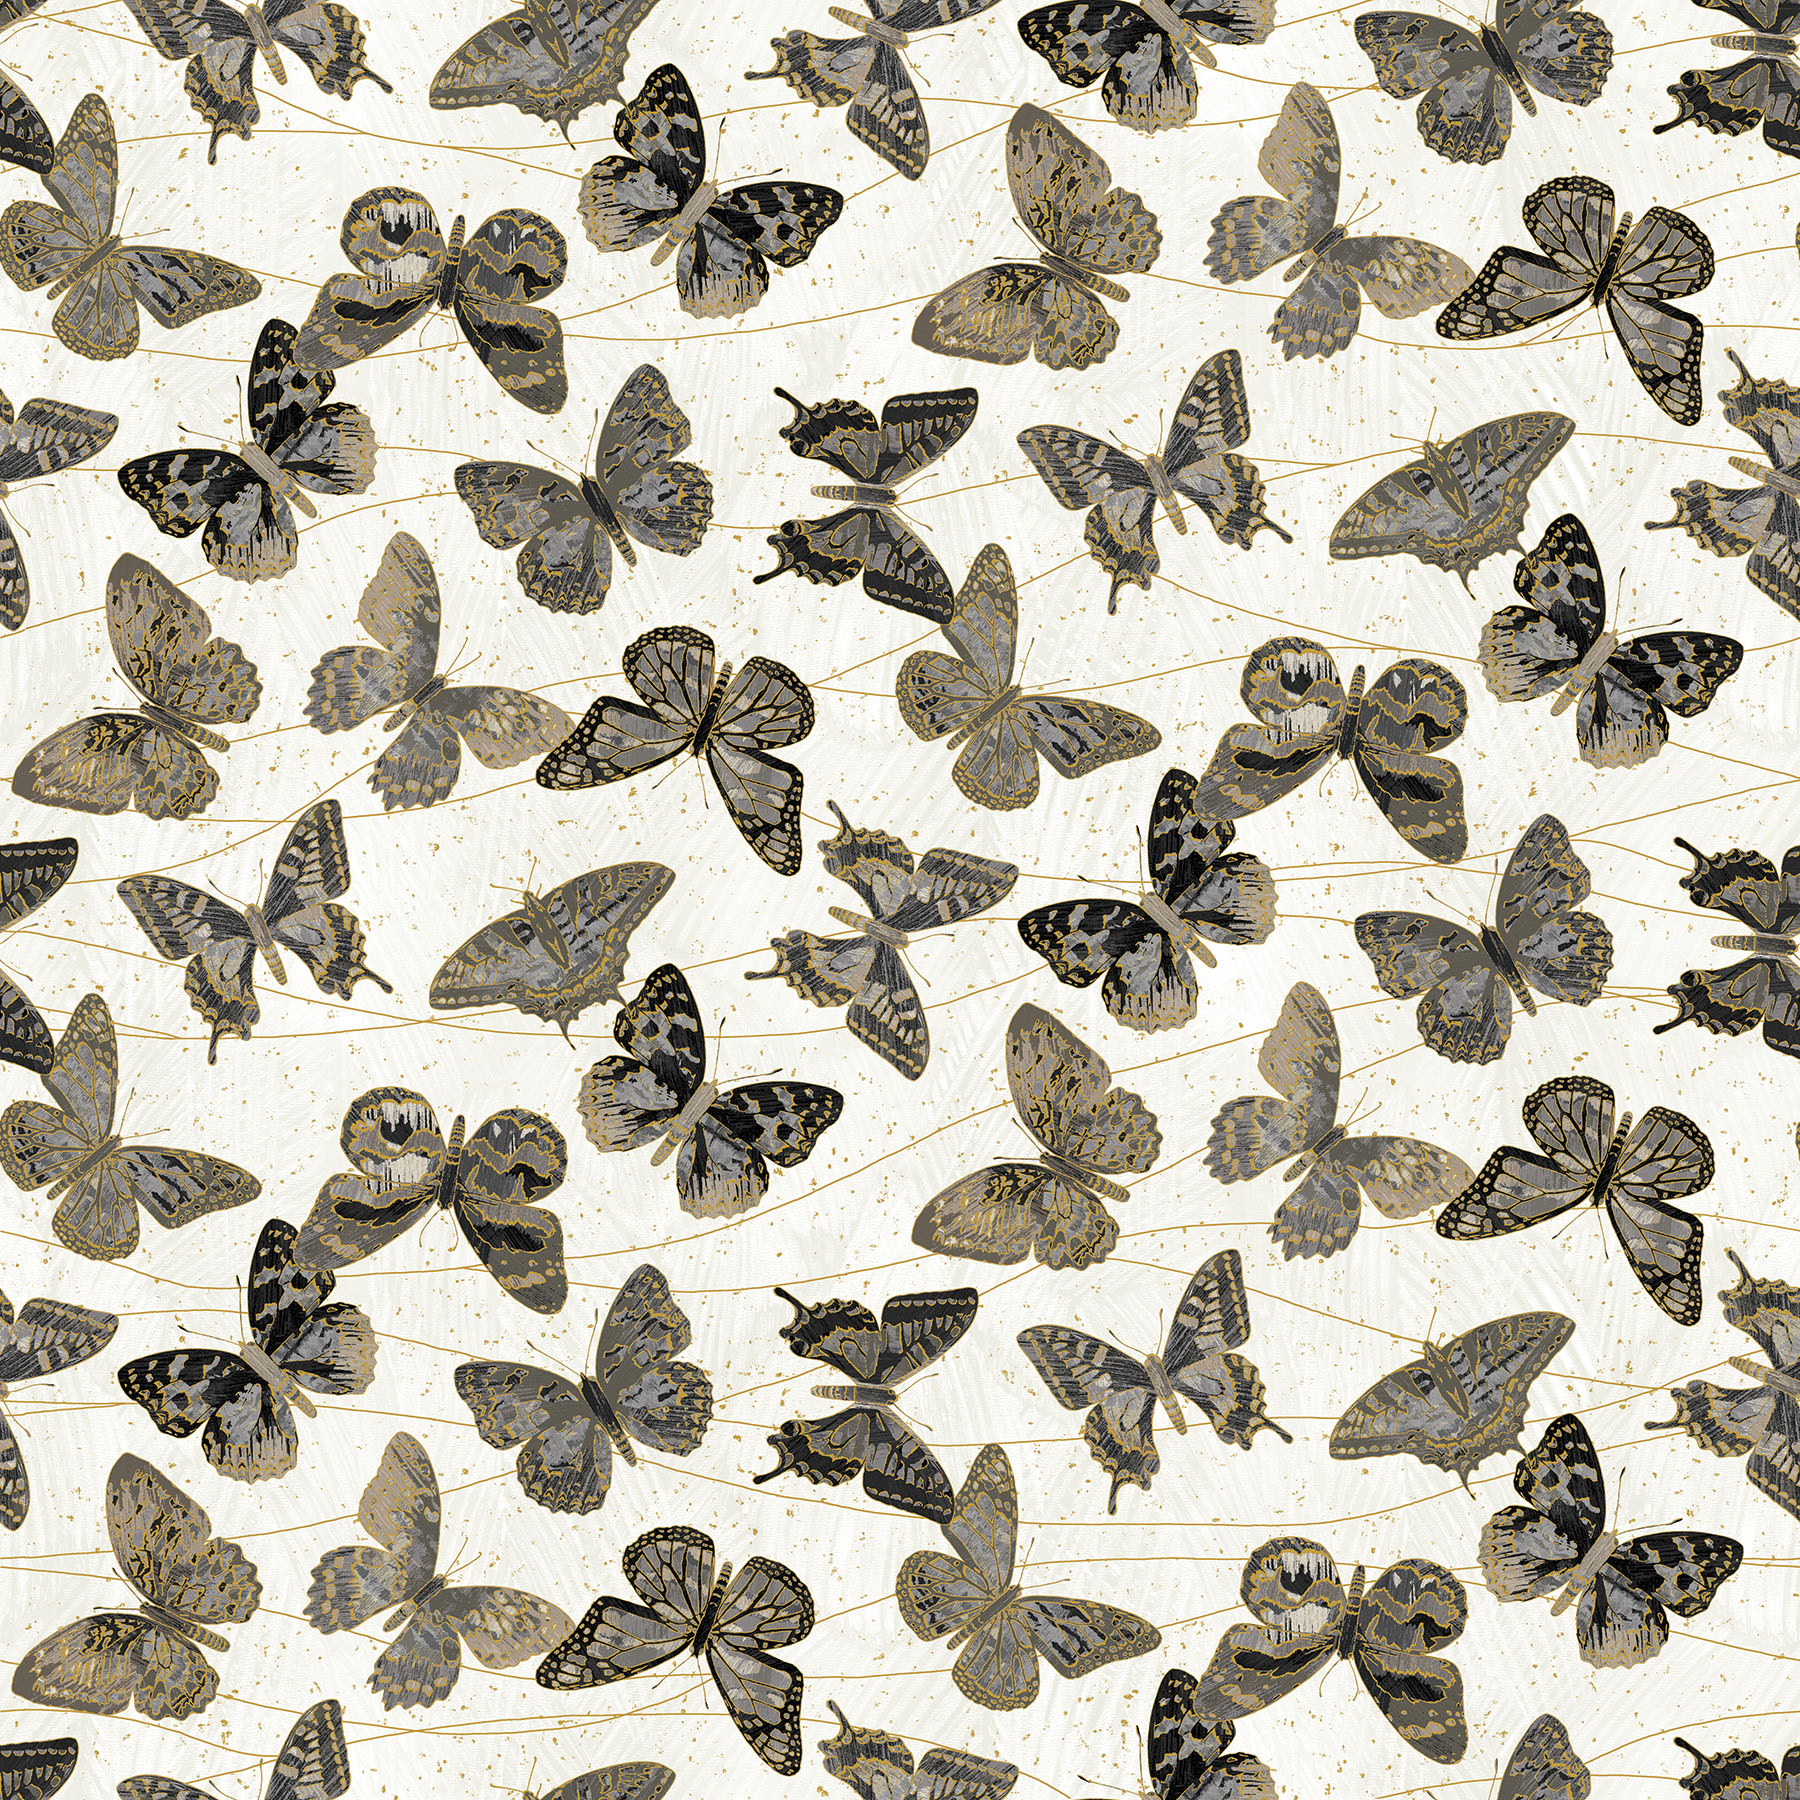 Noctural Bliss Fantasia Cotton Fabric Butterflies by Northcott 22957M-91